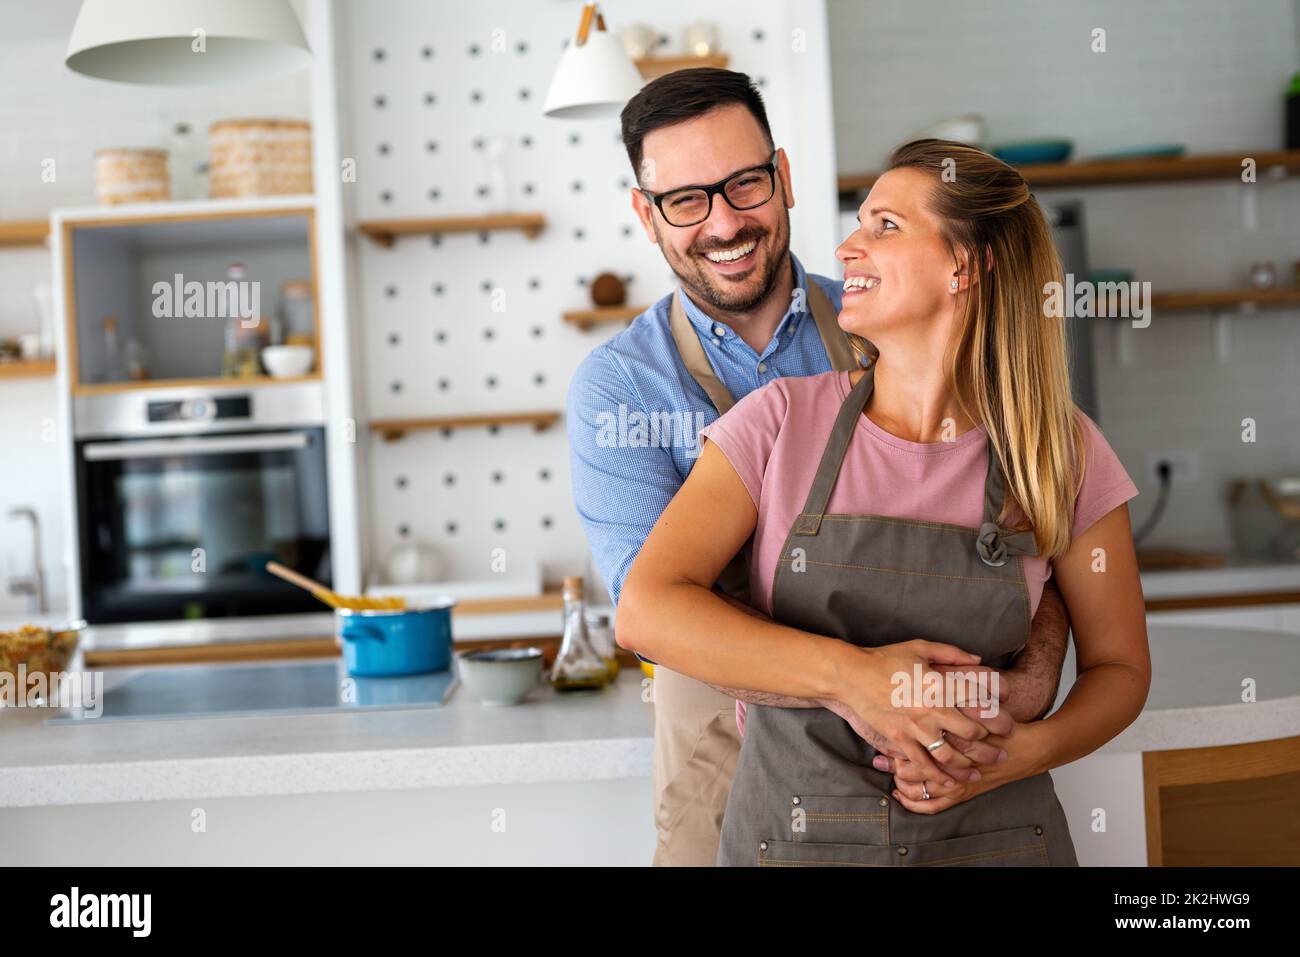 Attractive couple is cooking together organic healthy food in kitchen. Stock Photo